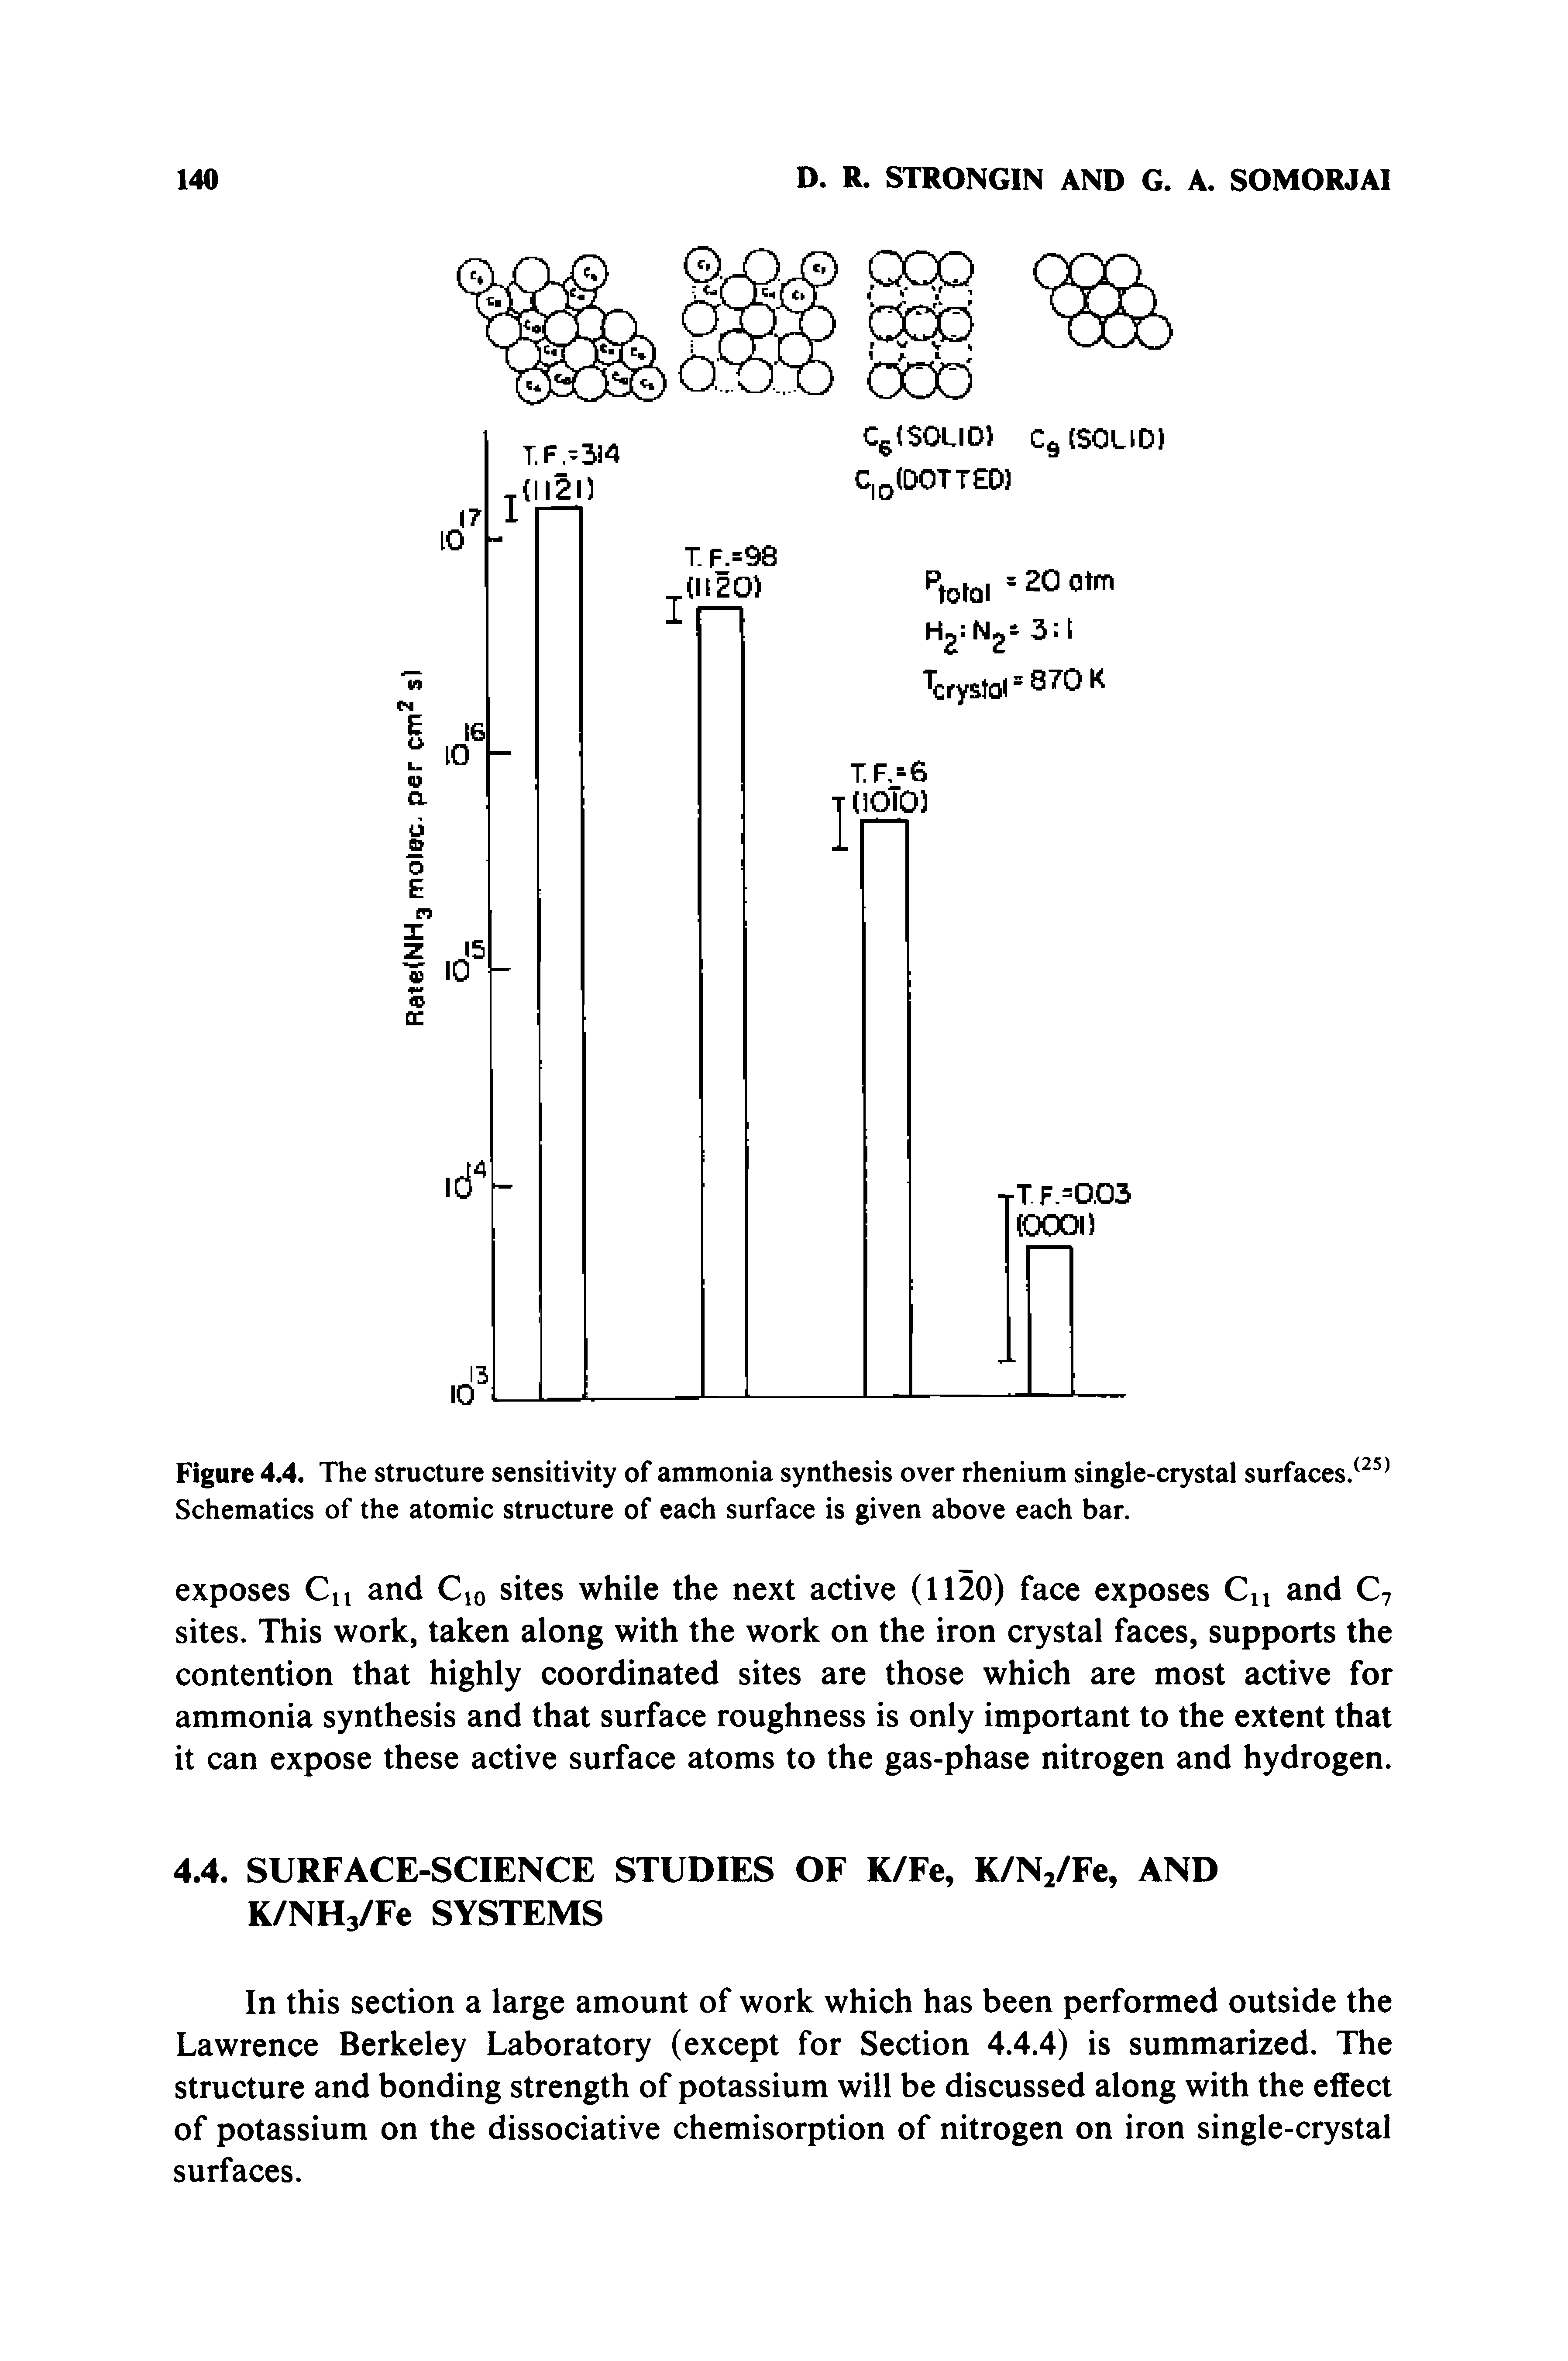 Figure 4.4. The structure sensitivity of ammonia synthesis over rhenium single-crystal surfaces/ Schematics of the atomic structure of each surface is given above each bar.